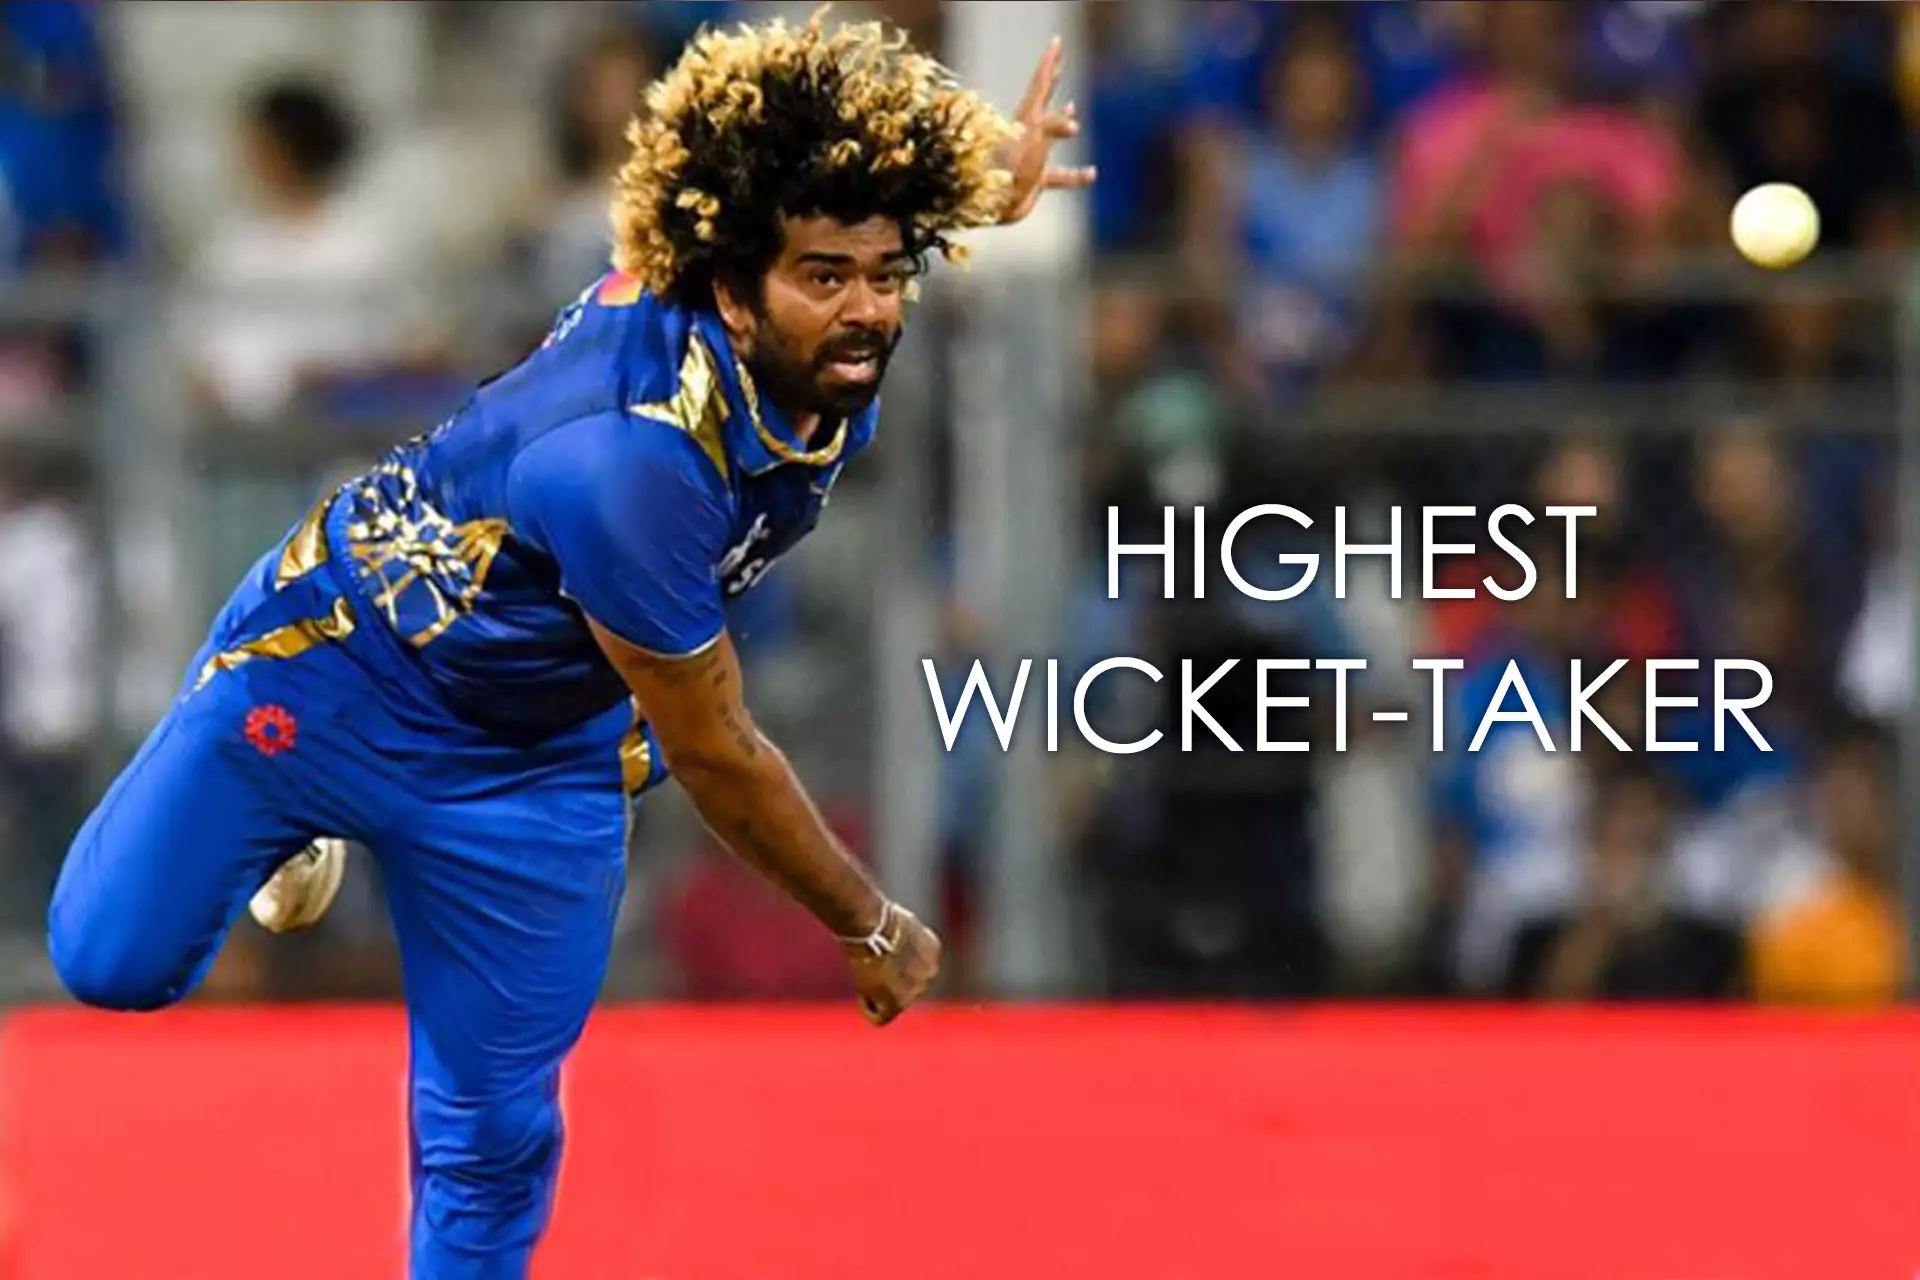 For true lovers of cricket, it would be exciting to guess the highest wicket-taker.